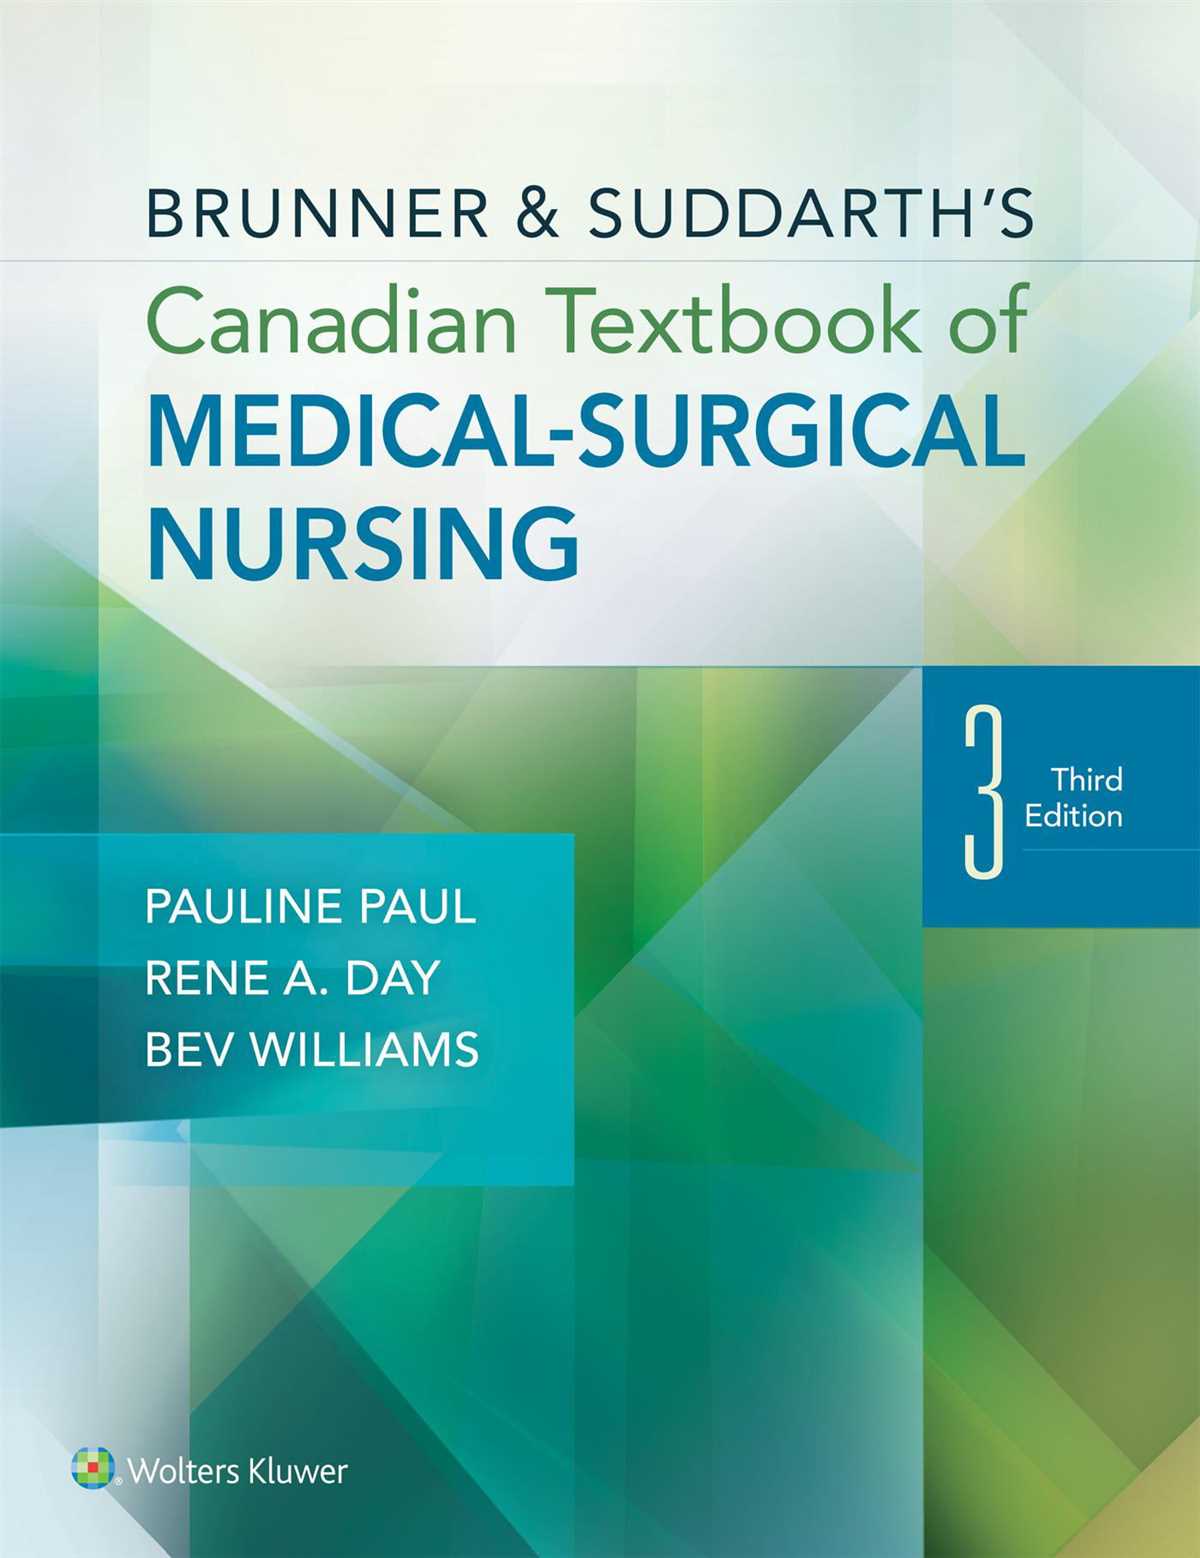 Chapter 1: Introduction to Medical-Surgical Nursing